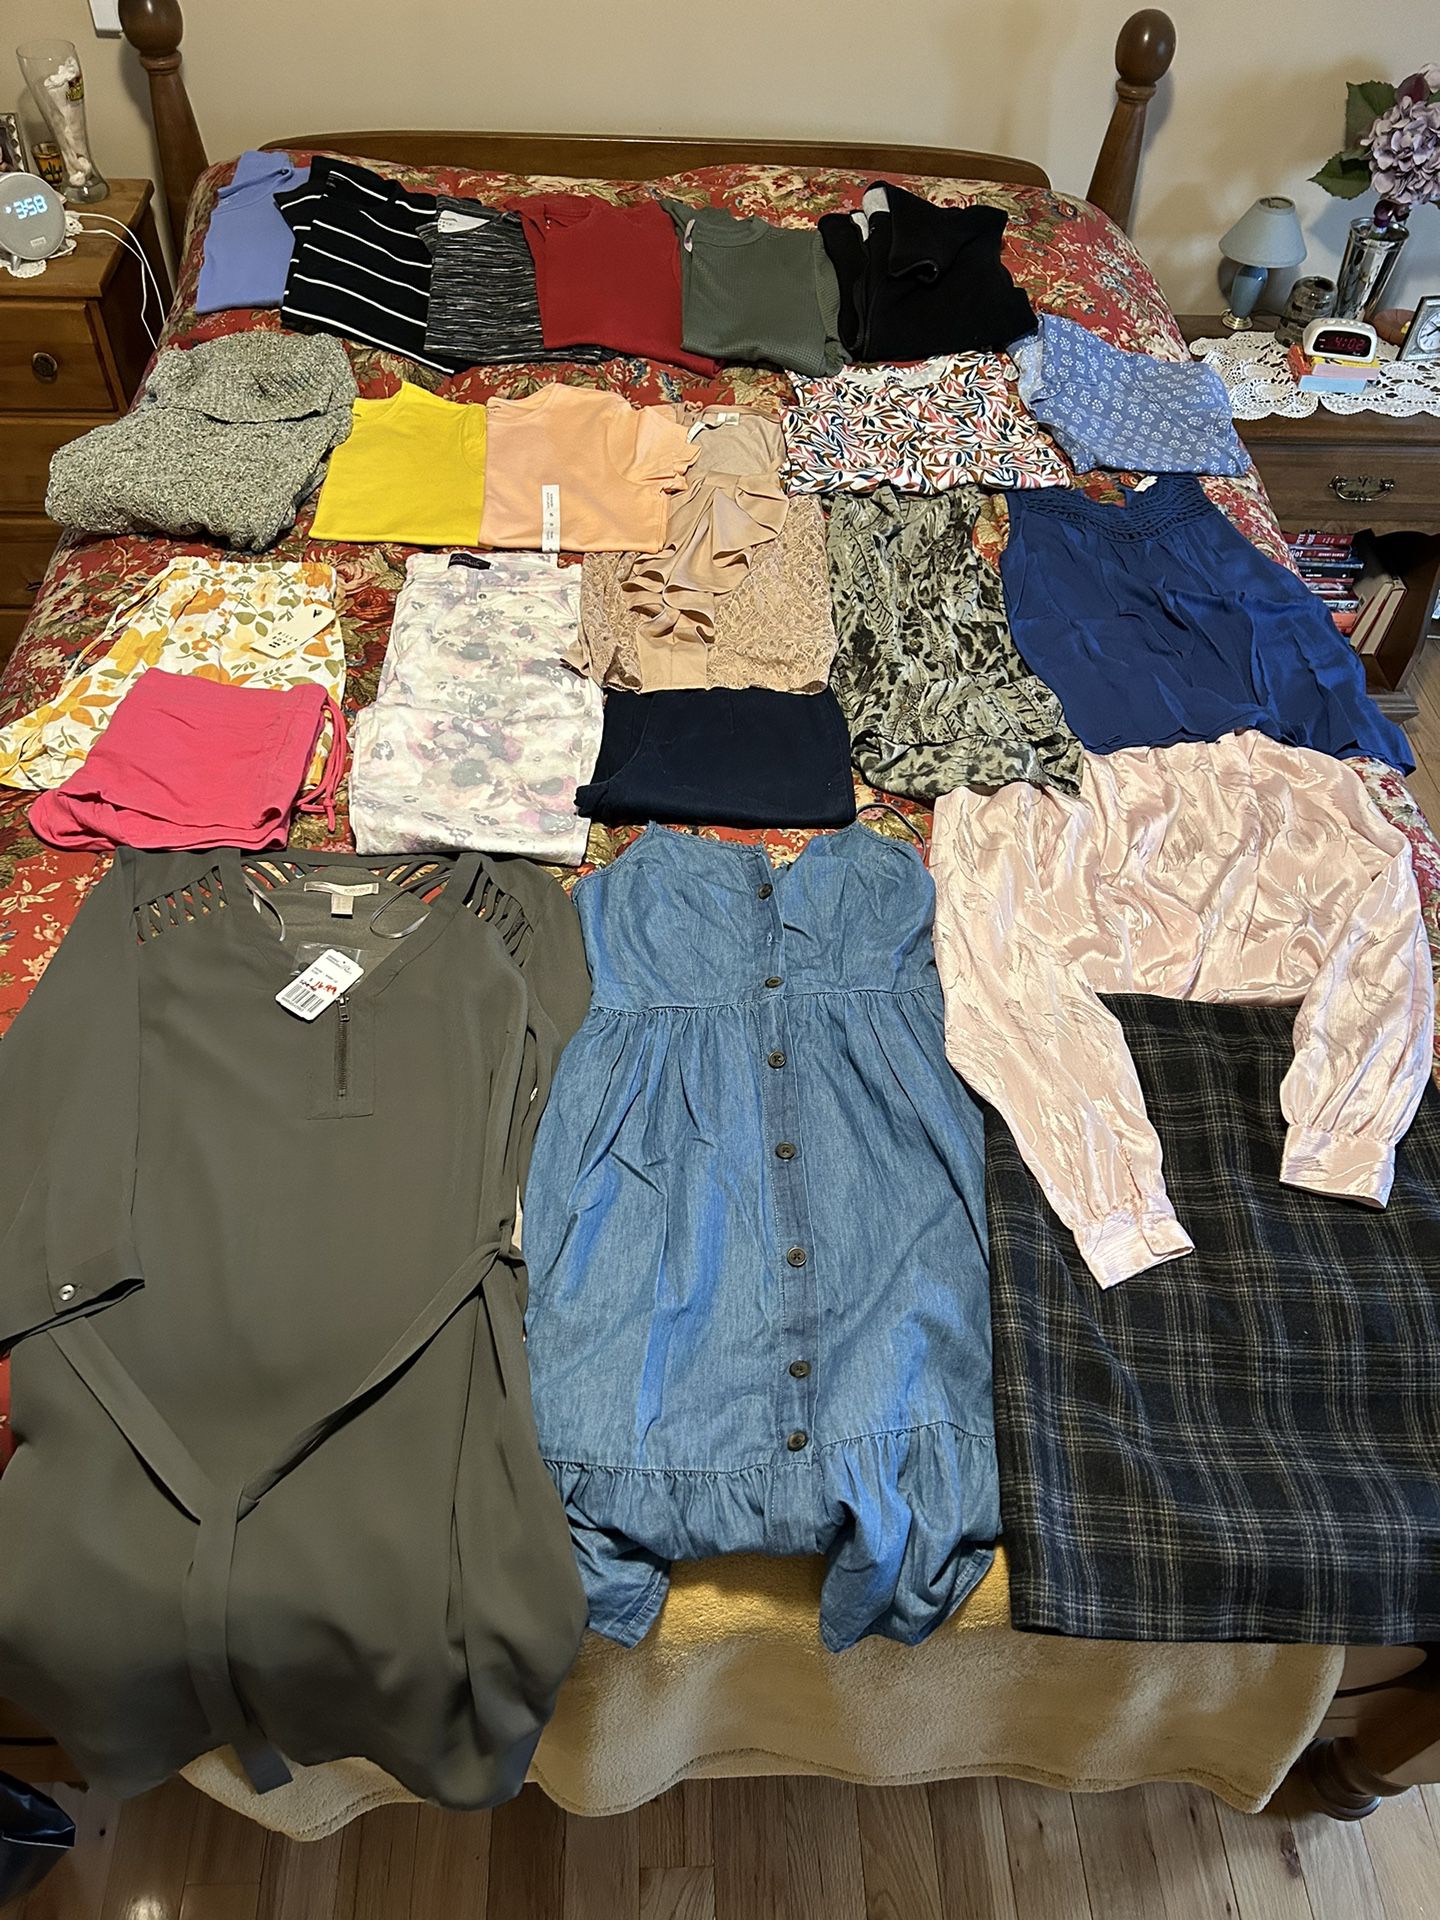 Big Bundle Of Ladies Clothes -Many Brand Names - Some W/ Tags - Mostly Size Small